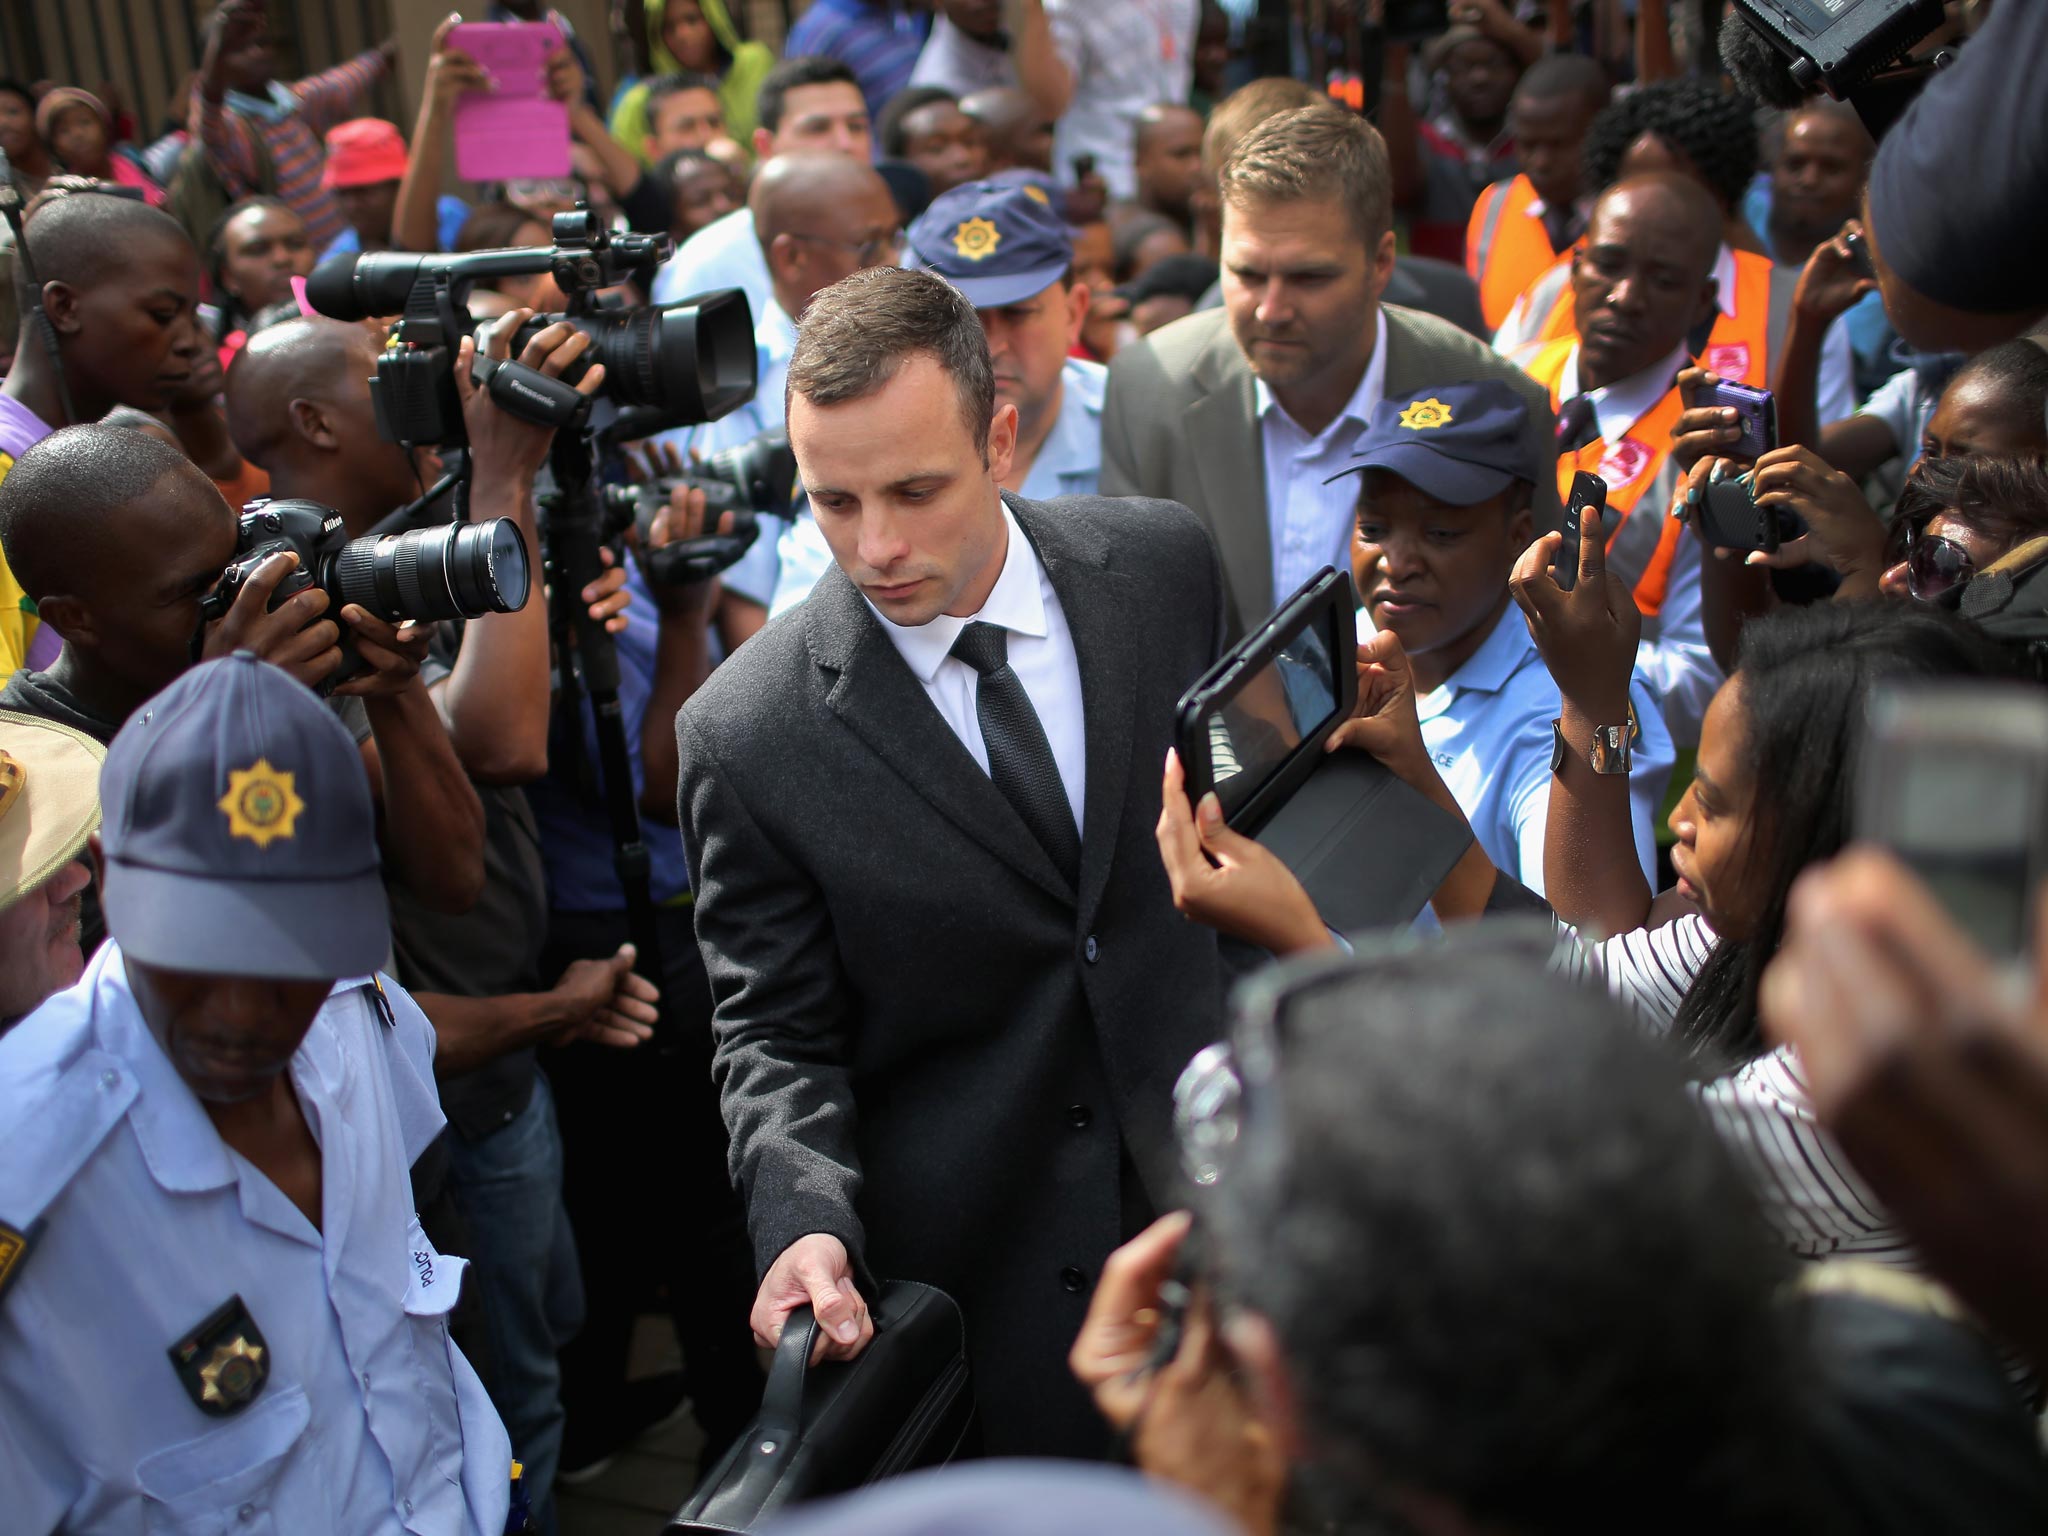 Oscar Pistorius is surrounded by police and media as he leaves North Gauteng High Court